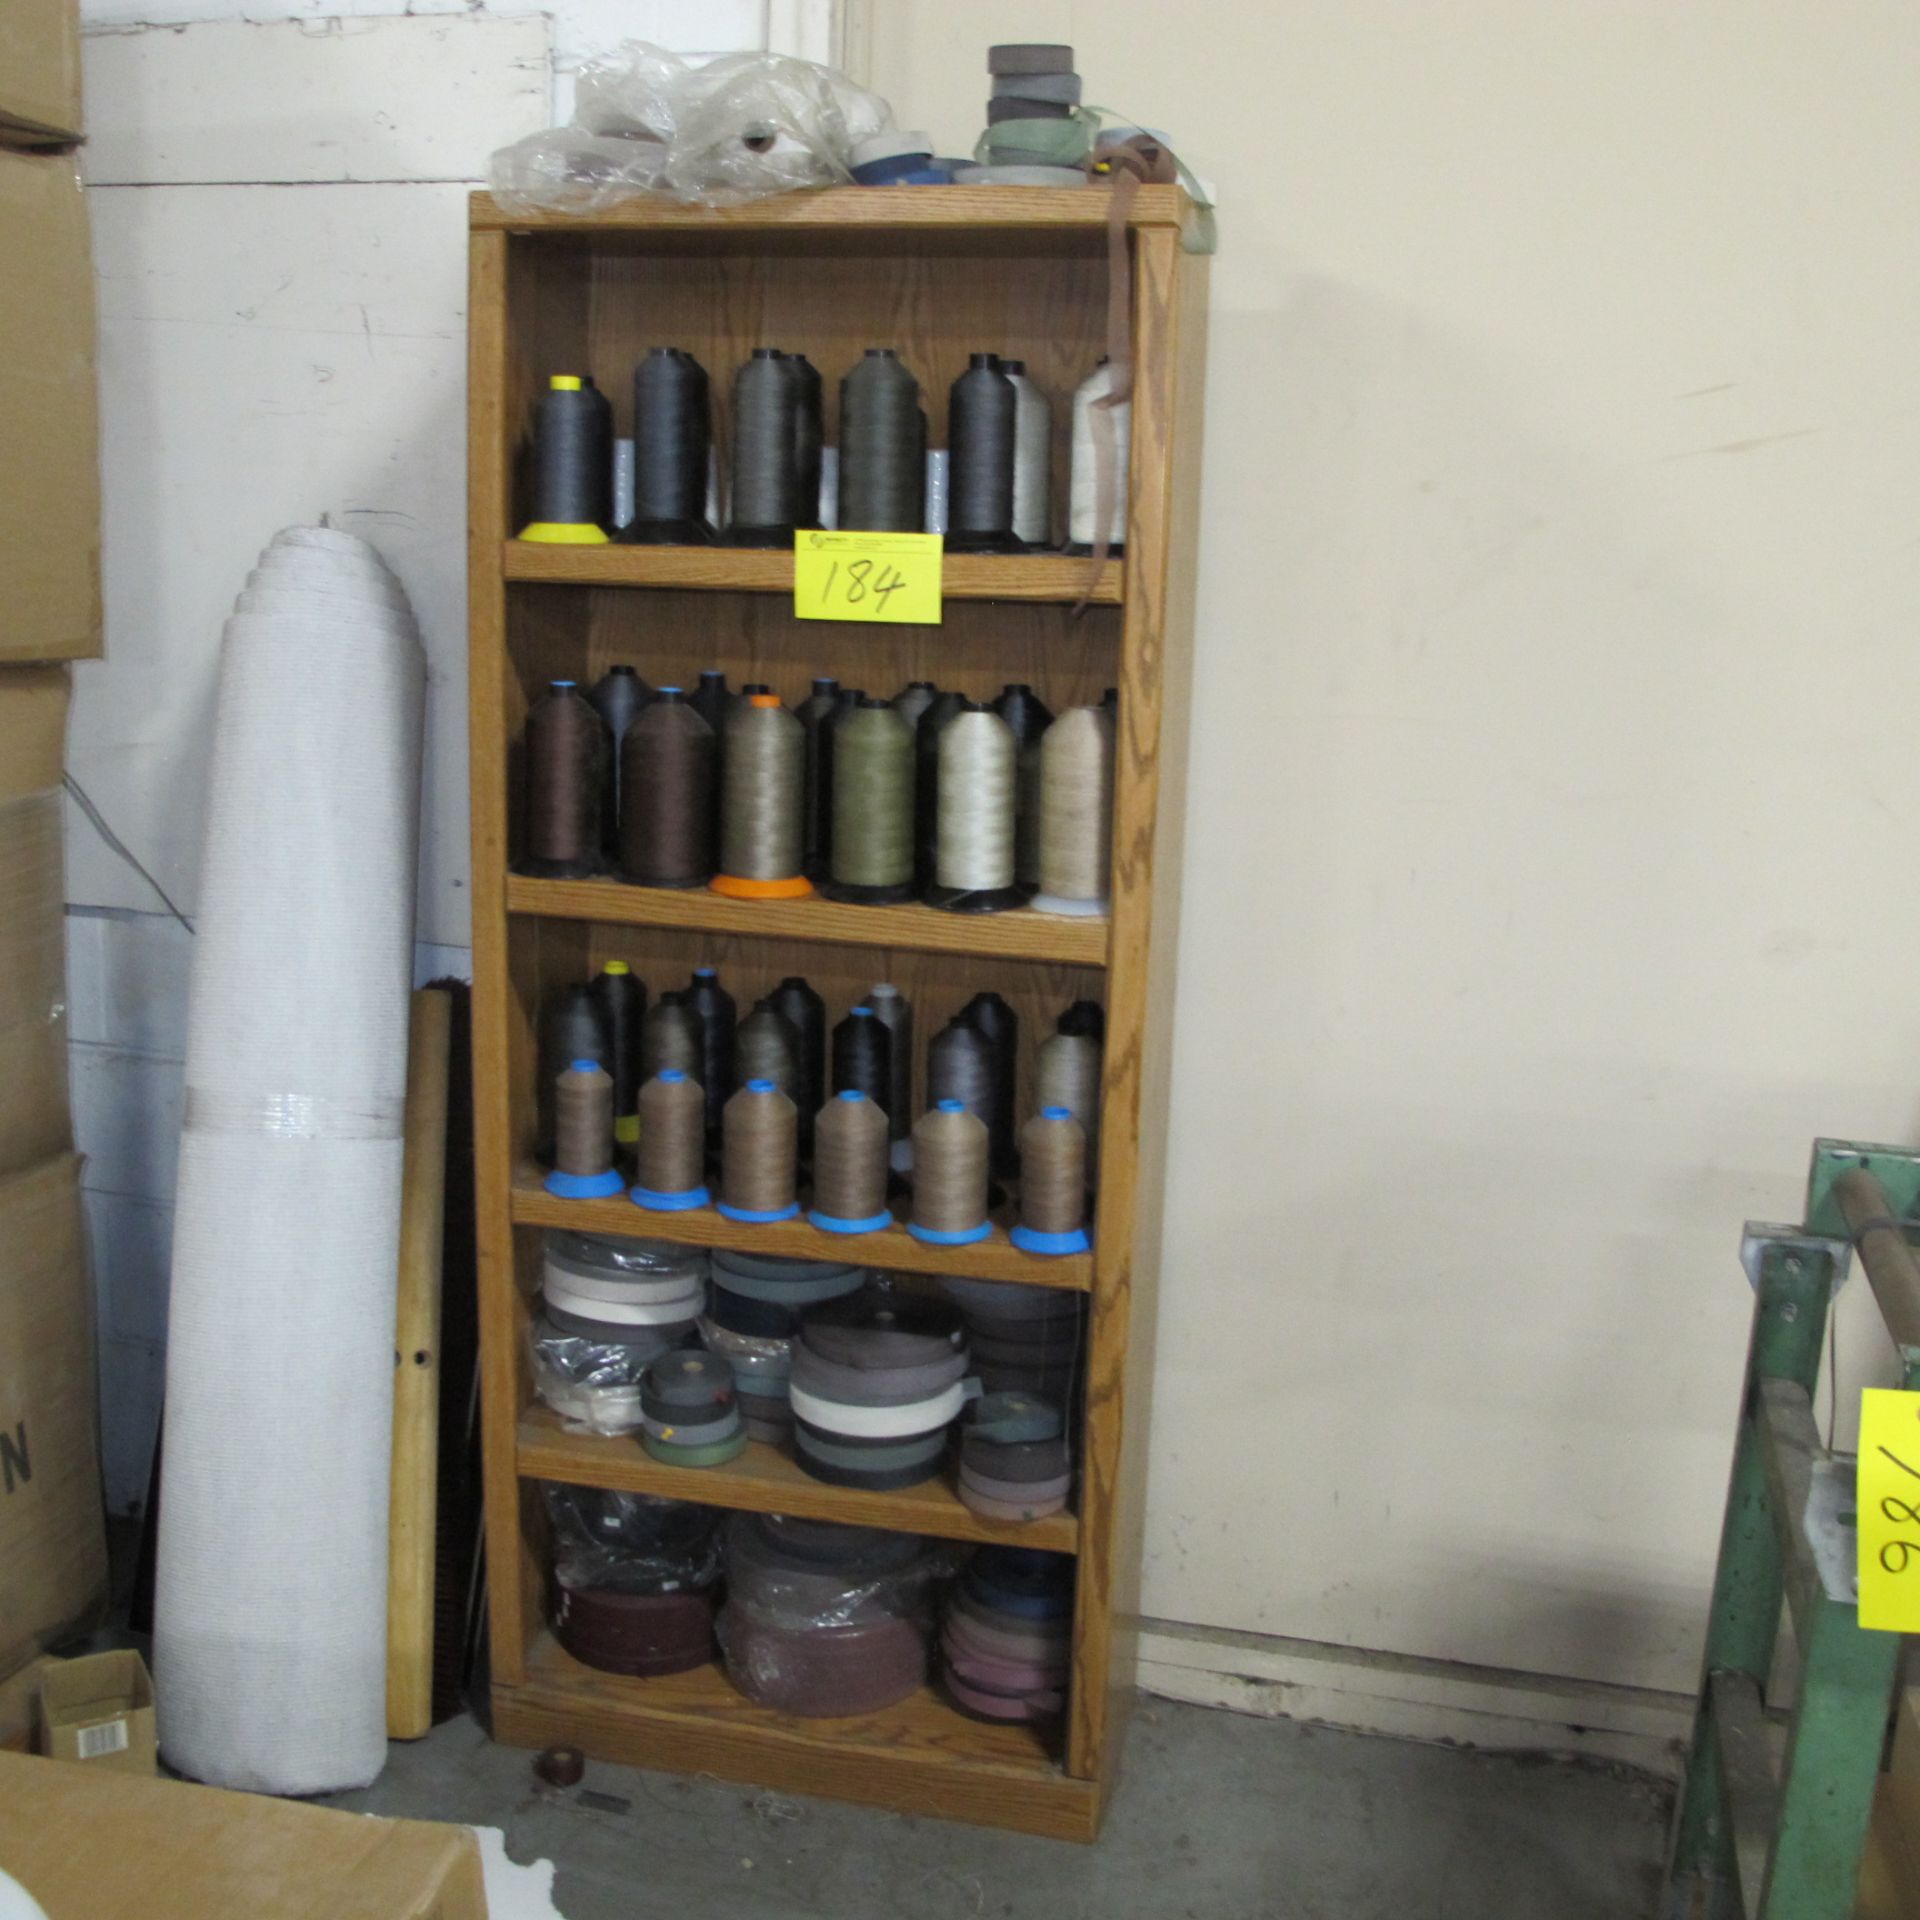 LOT OF (2) SHELVING UNITS W/ SPOOLS OF THREAD, (3) BOXES OF BELTS AND VARIOUS SEWING MACHINE PARTS - Image 4 of 4